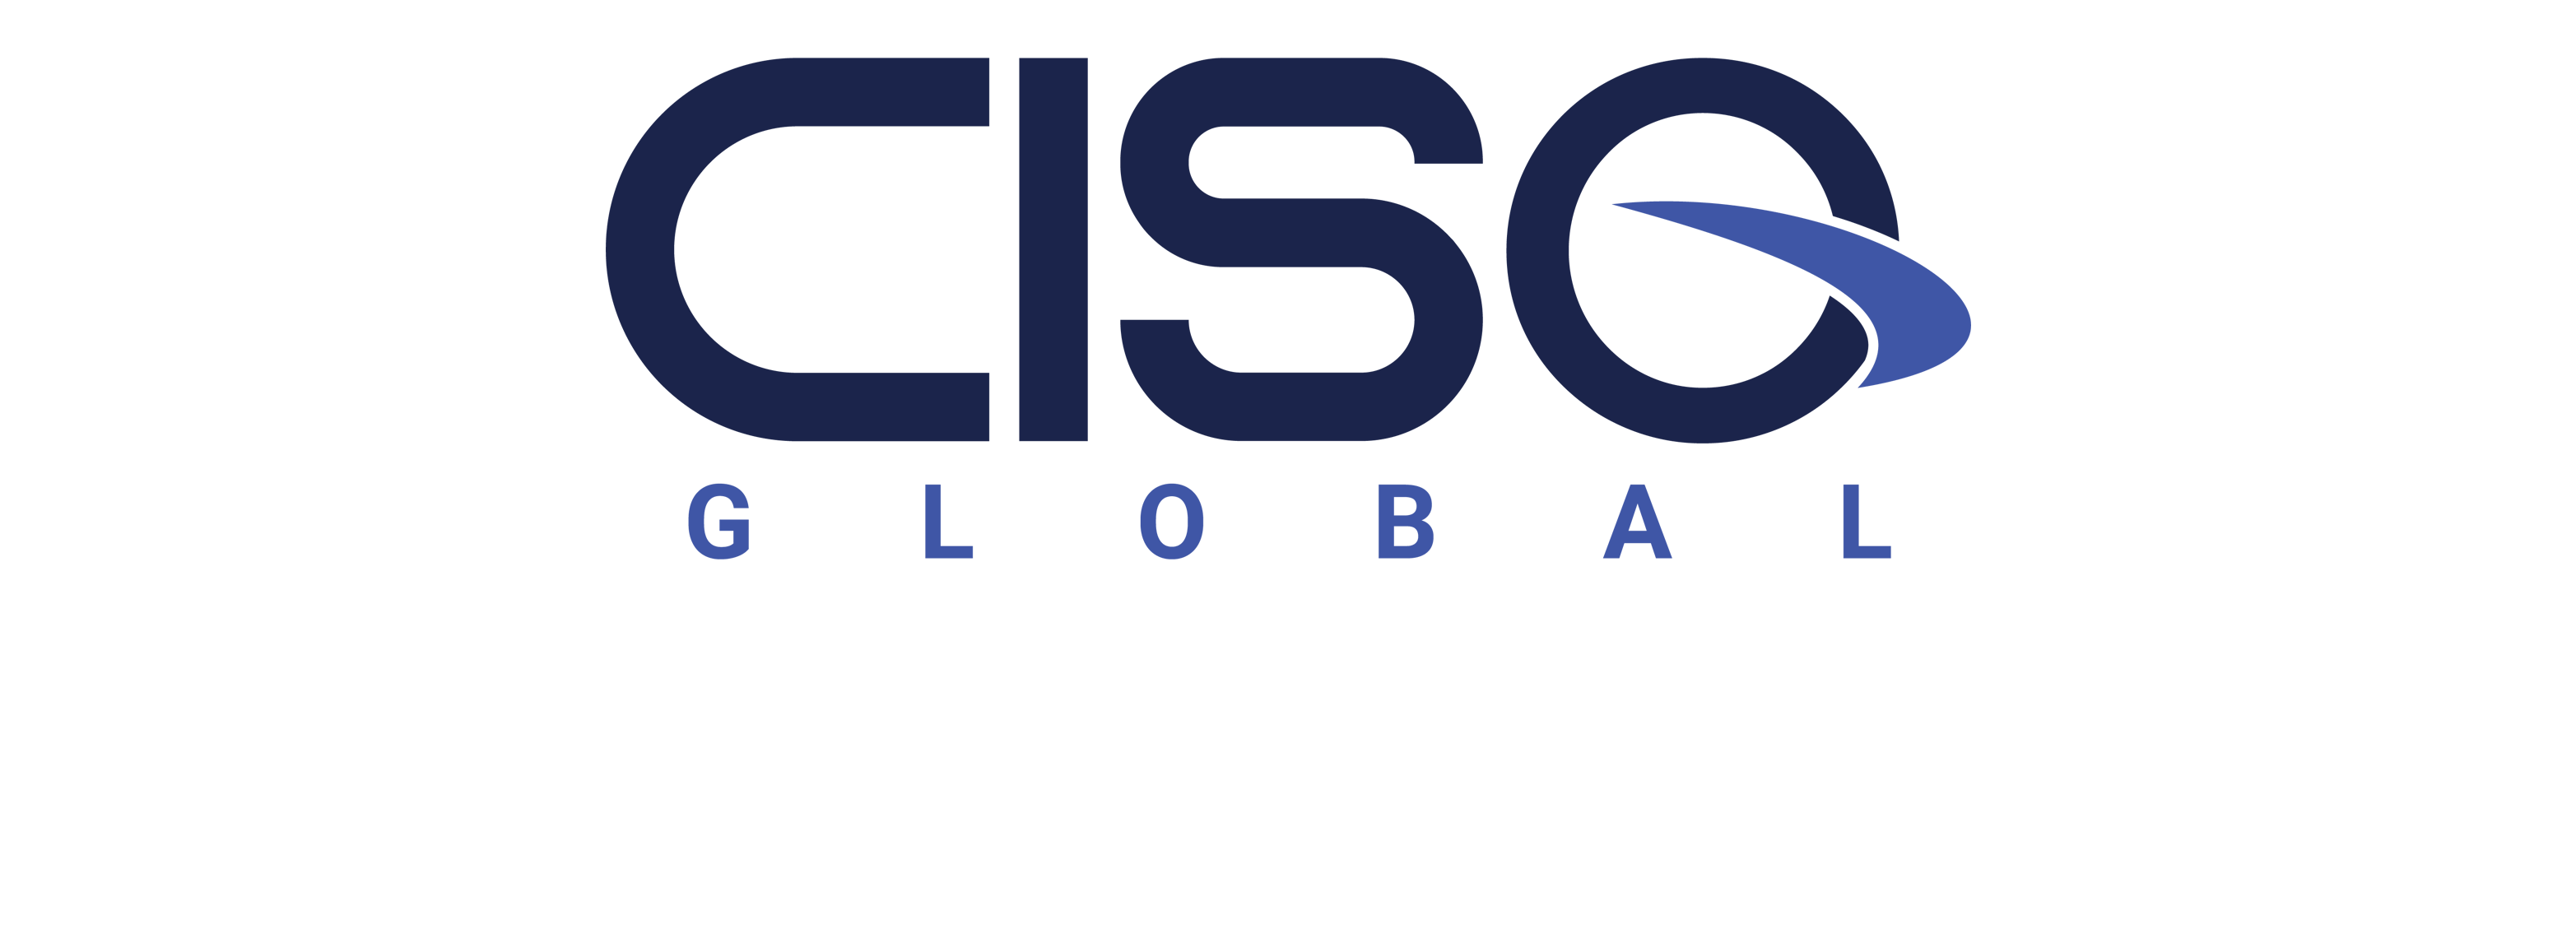 CISO Global to Present at the 26th Annual Needham Growth Conference